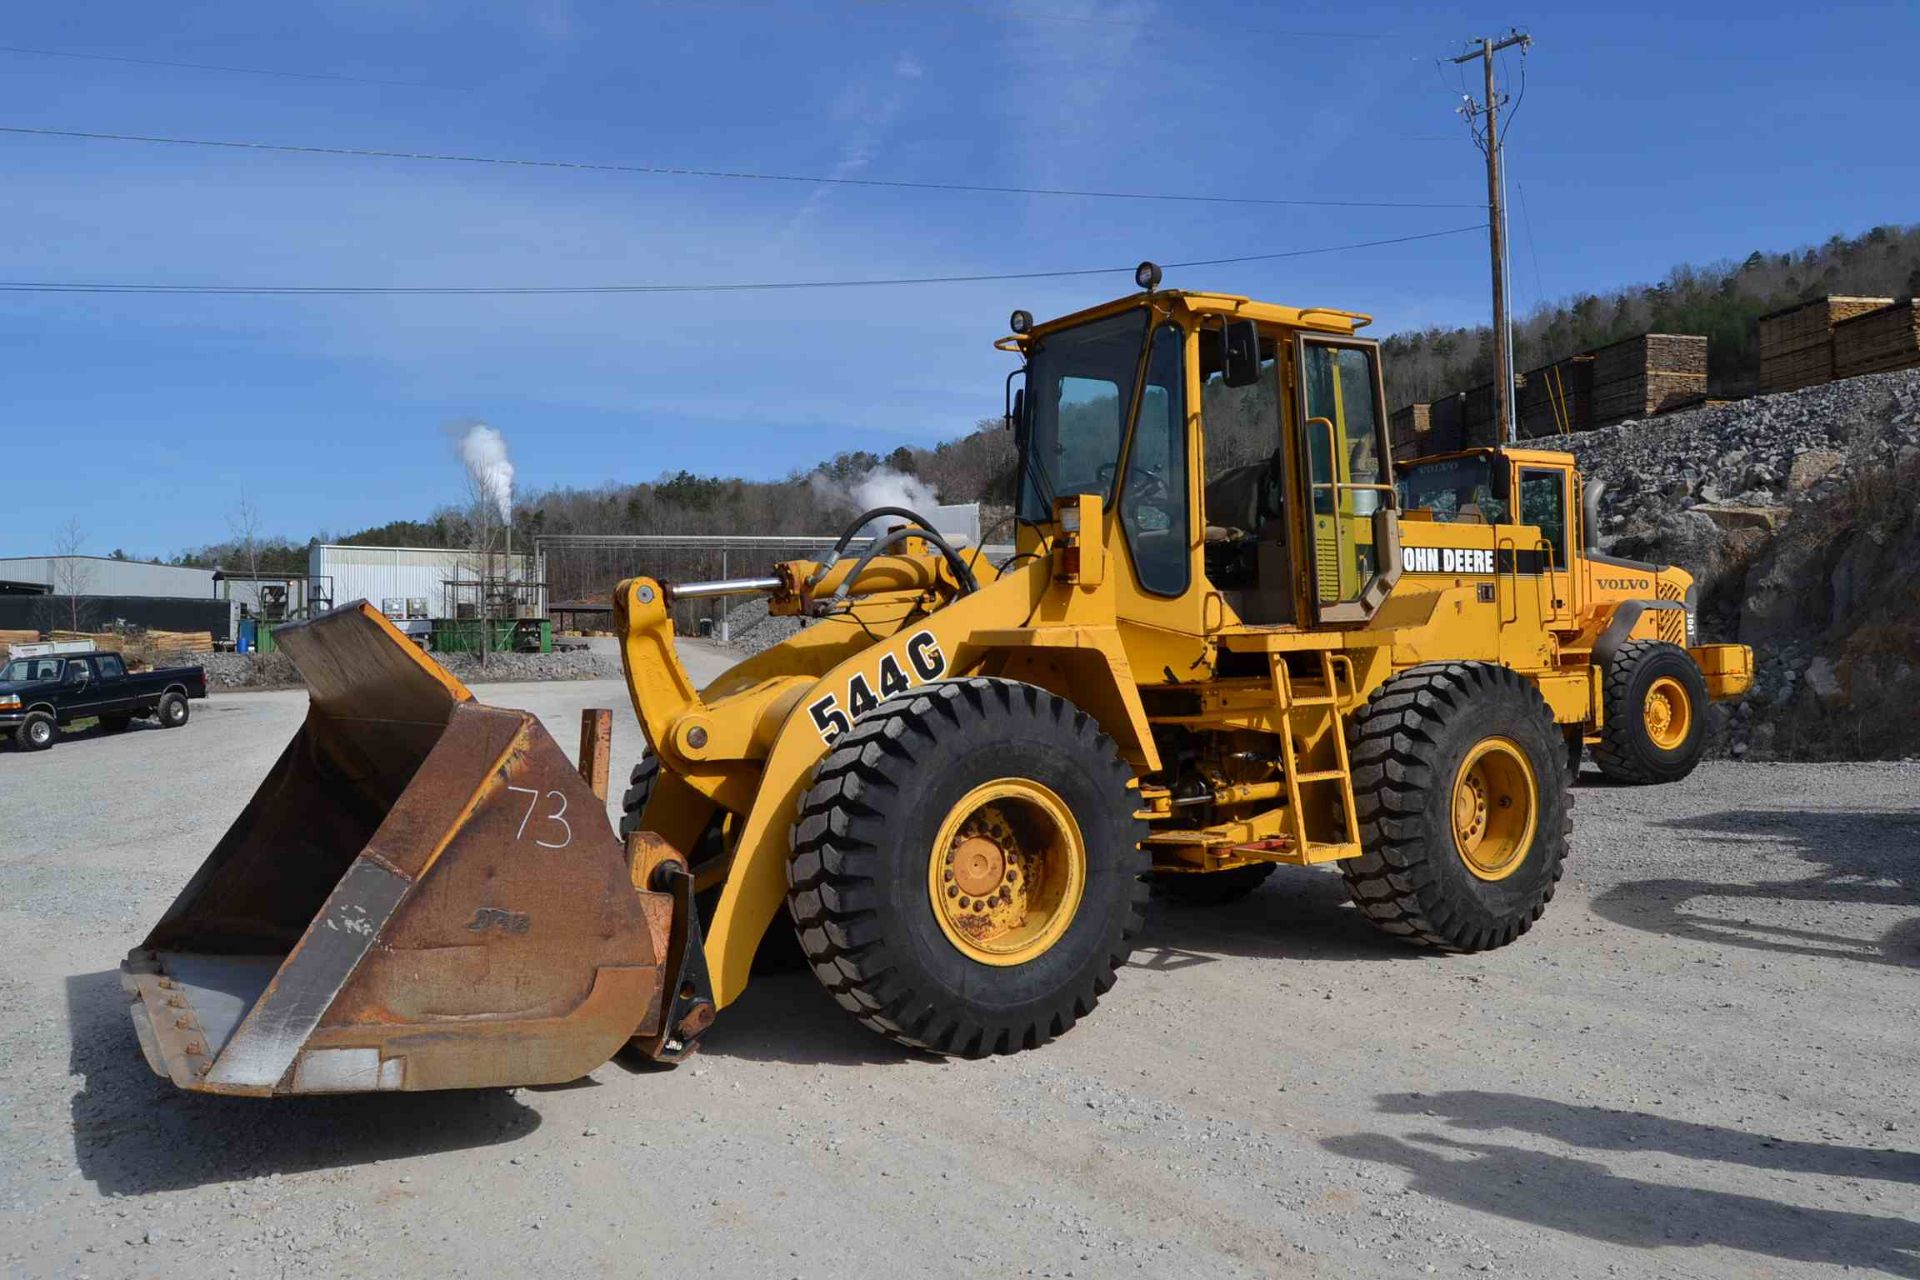 1996 JOHN DEERE 544G ARTICULATING WHEEL LOADER W/ENCLOSED CAB; W/20.5X25 RUBBER; W/QUICK ATTACH; W/ - Image 3 of 3